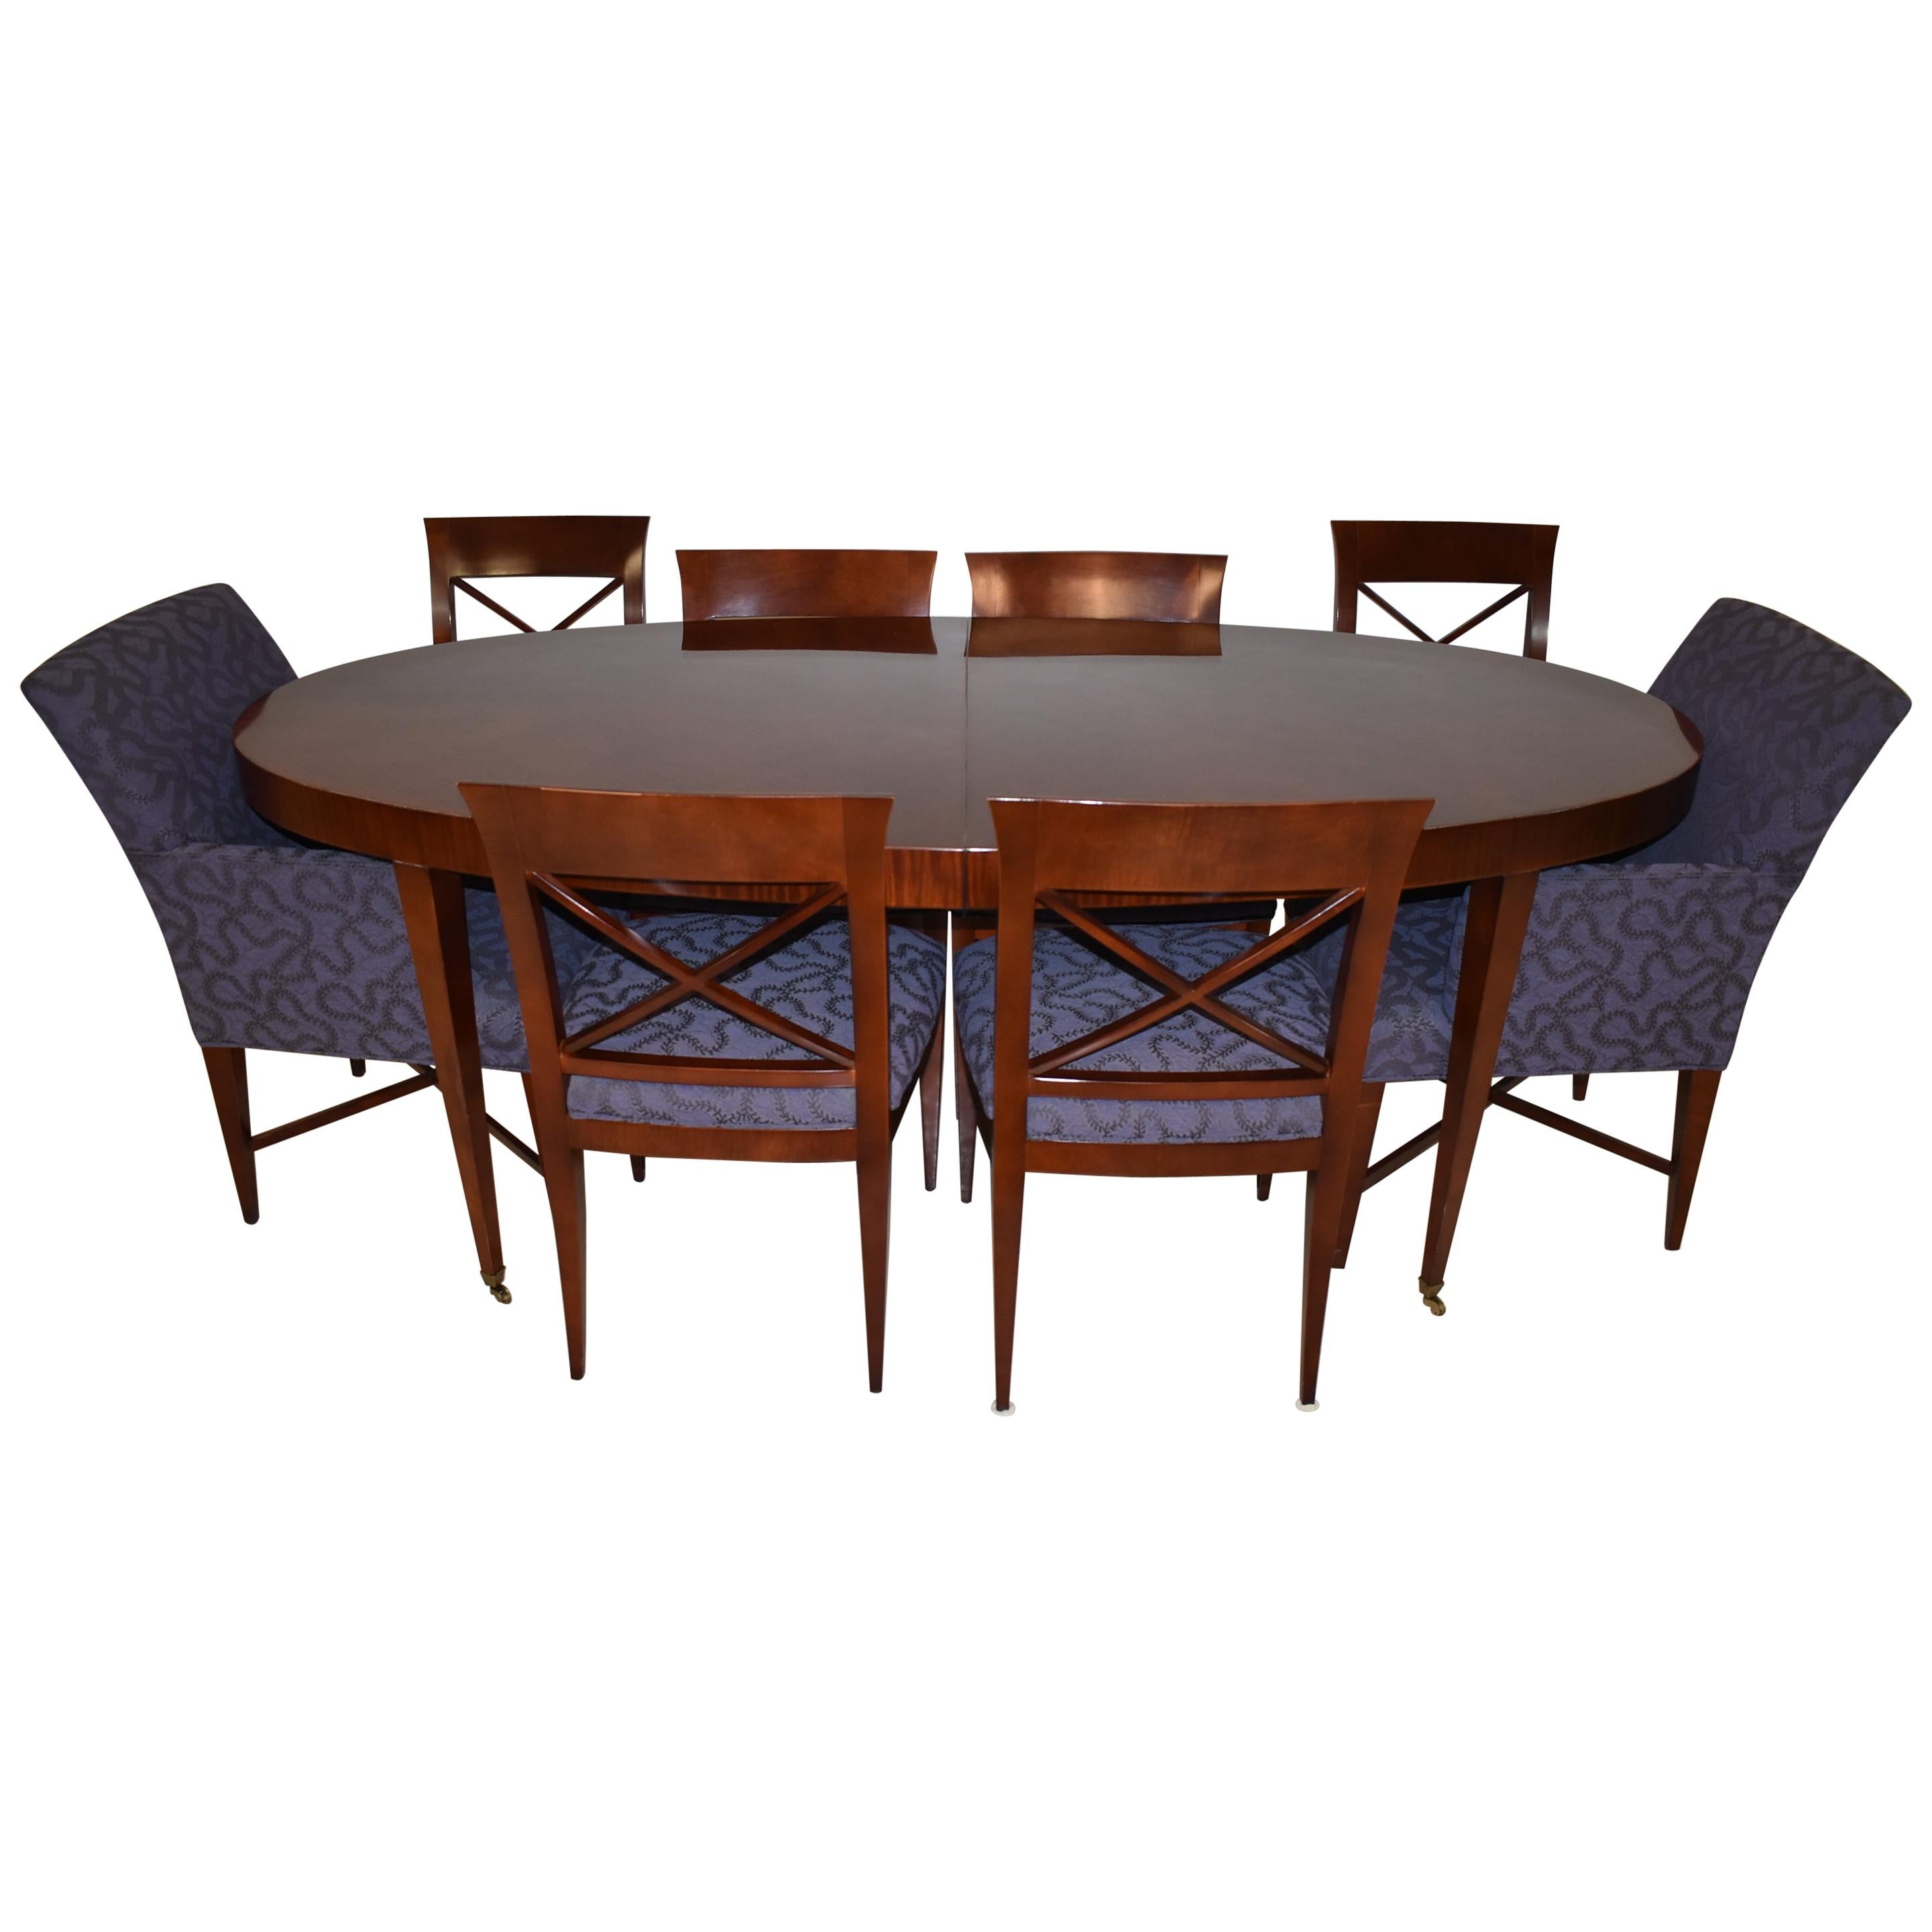 Baker Furniture Oval Dining Table & Chairs "Archetype" Designed by M. Vanderdyl